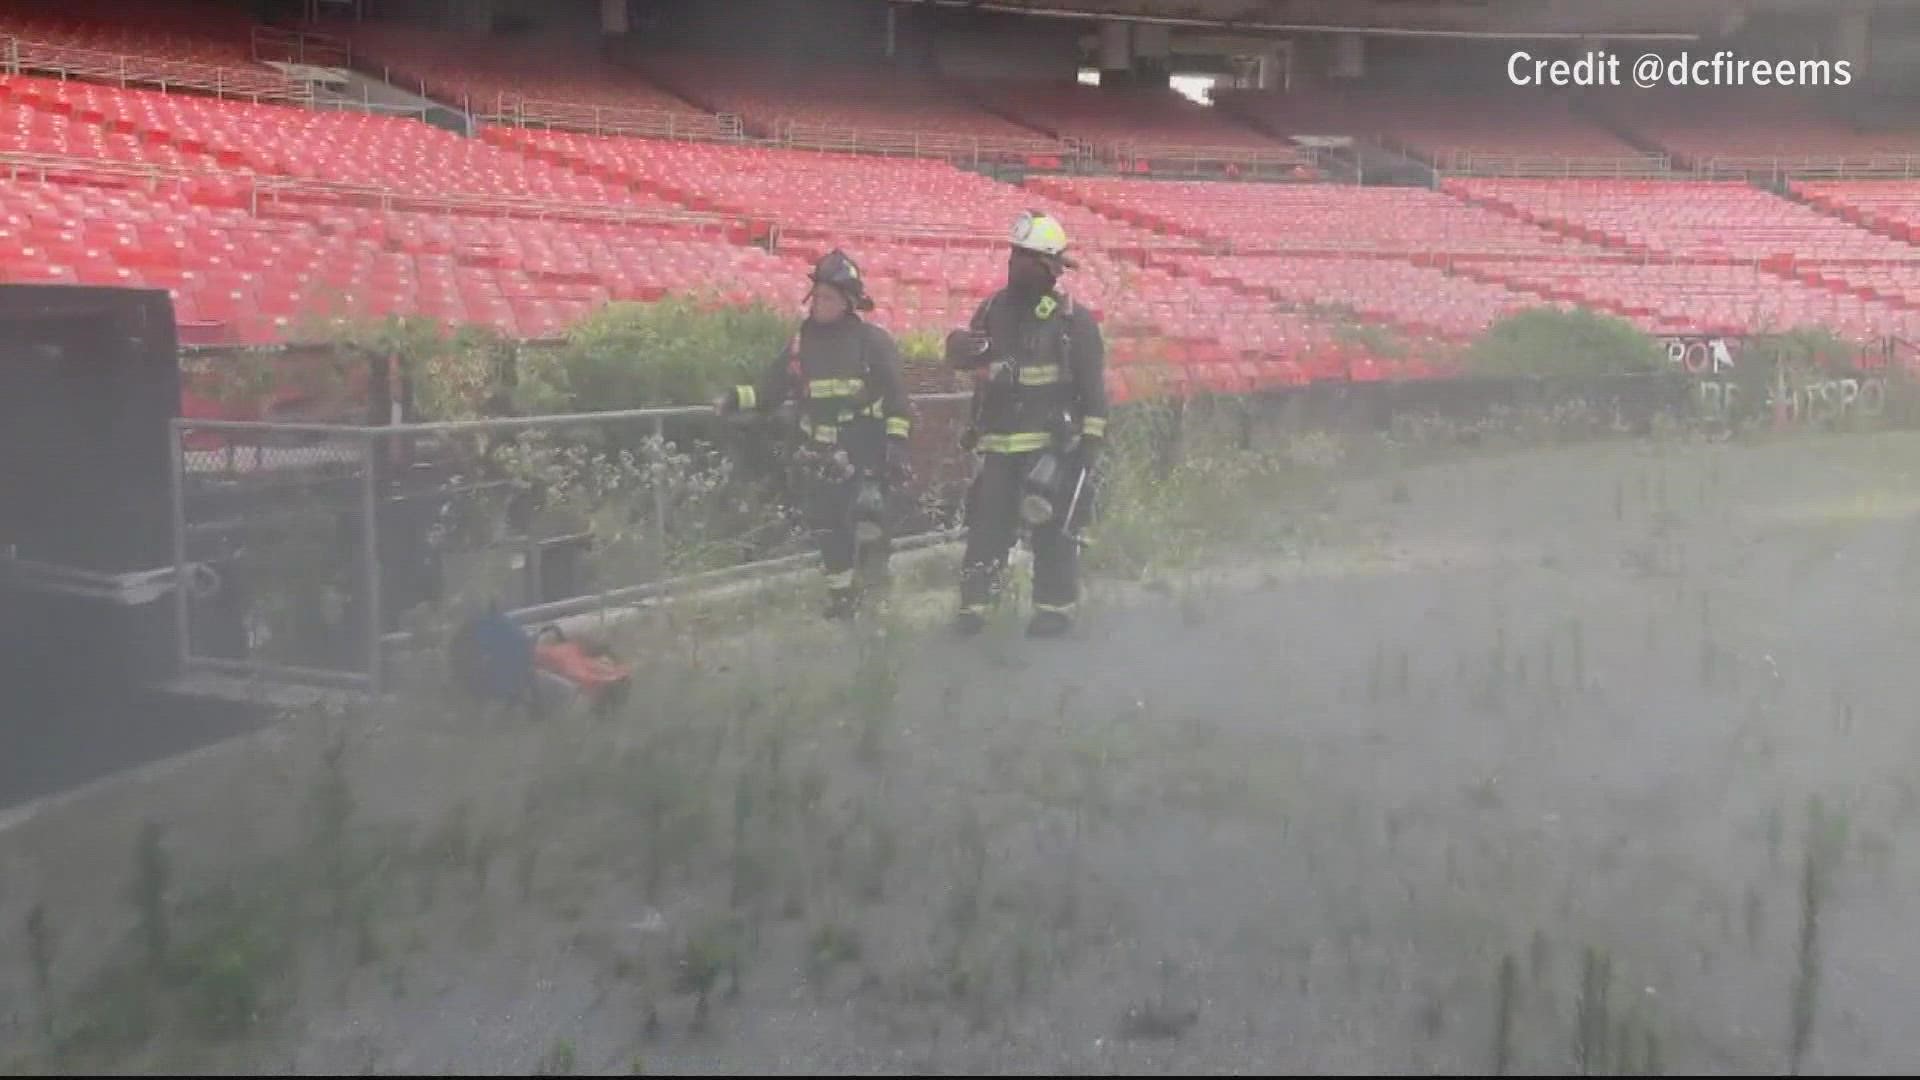 Officials say that DC Fire and EMS are responding to a fire at RFK Stadium in D.C.